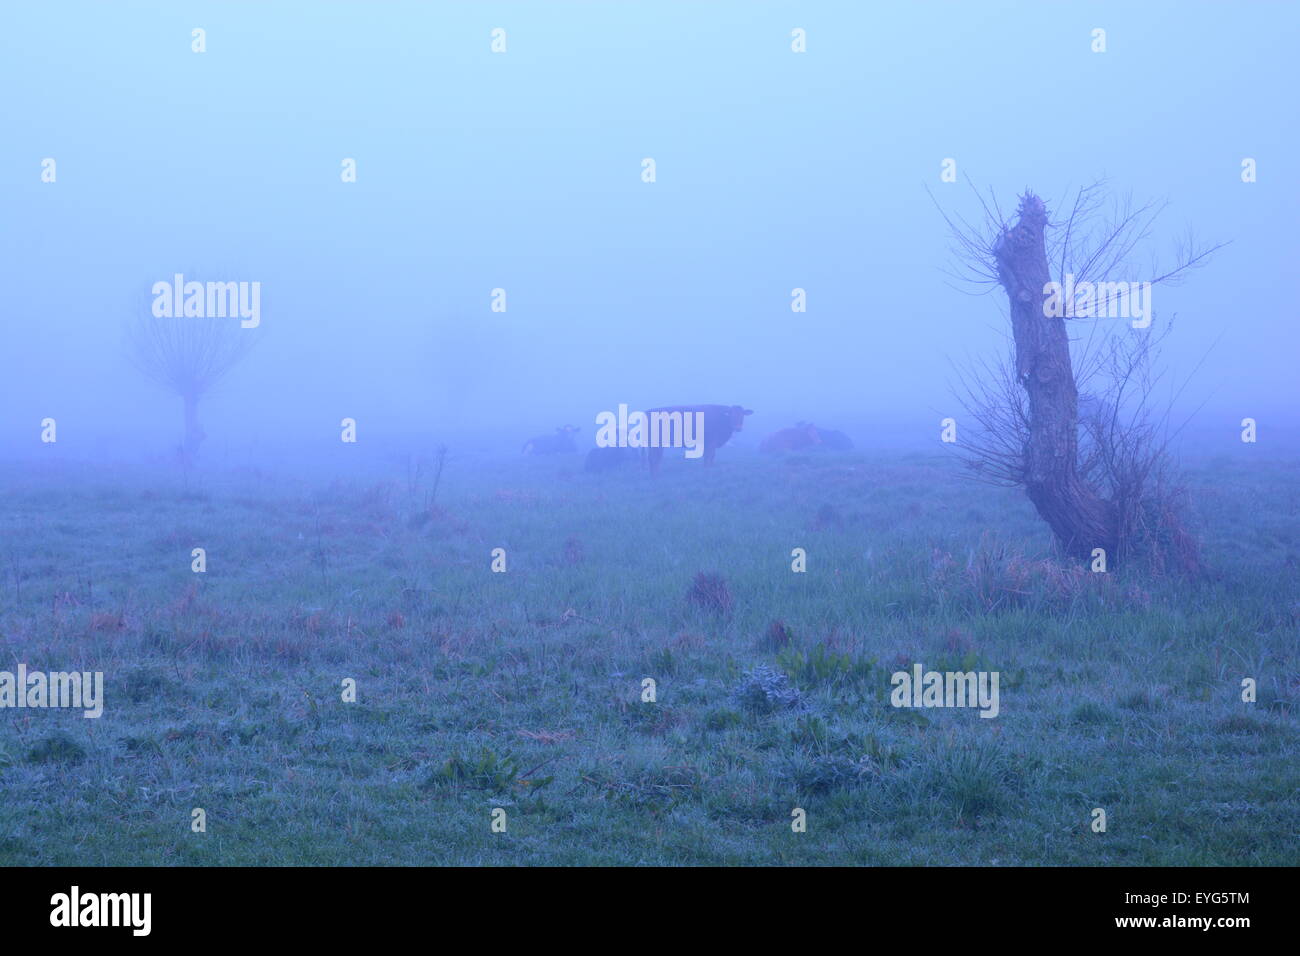 Cows shrouded in blue mist on a cold morning. Eerie scene. Stock Photo